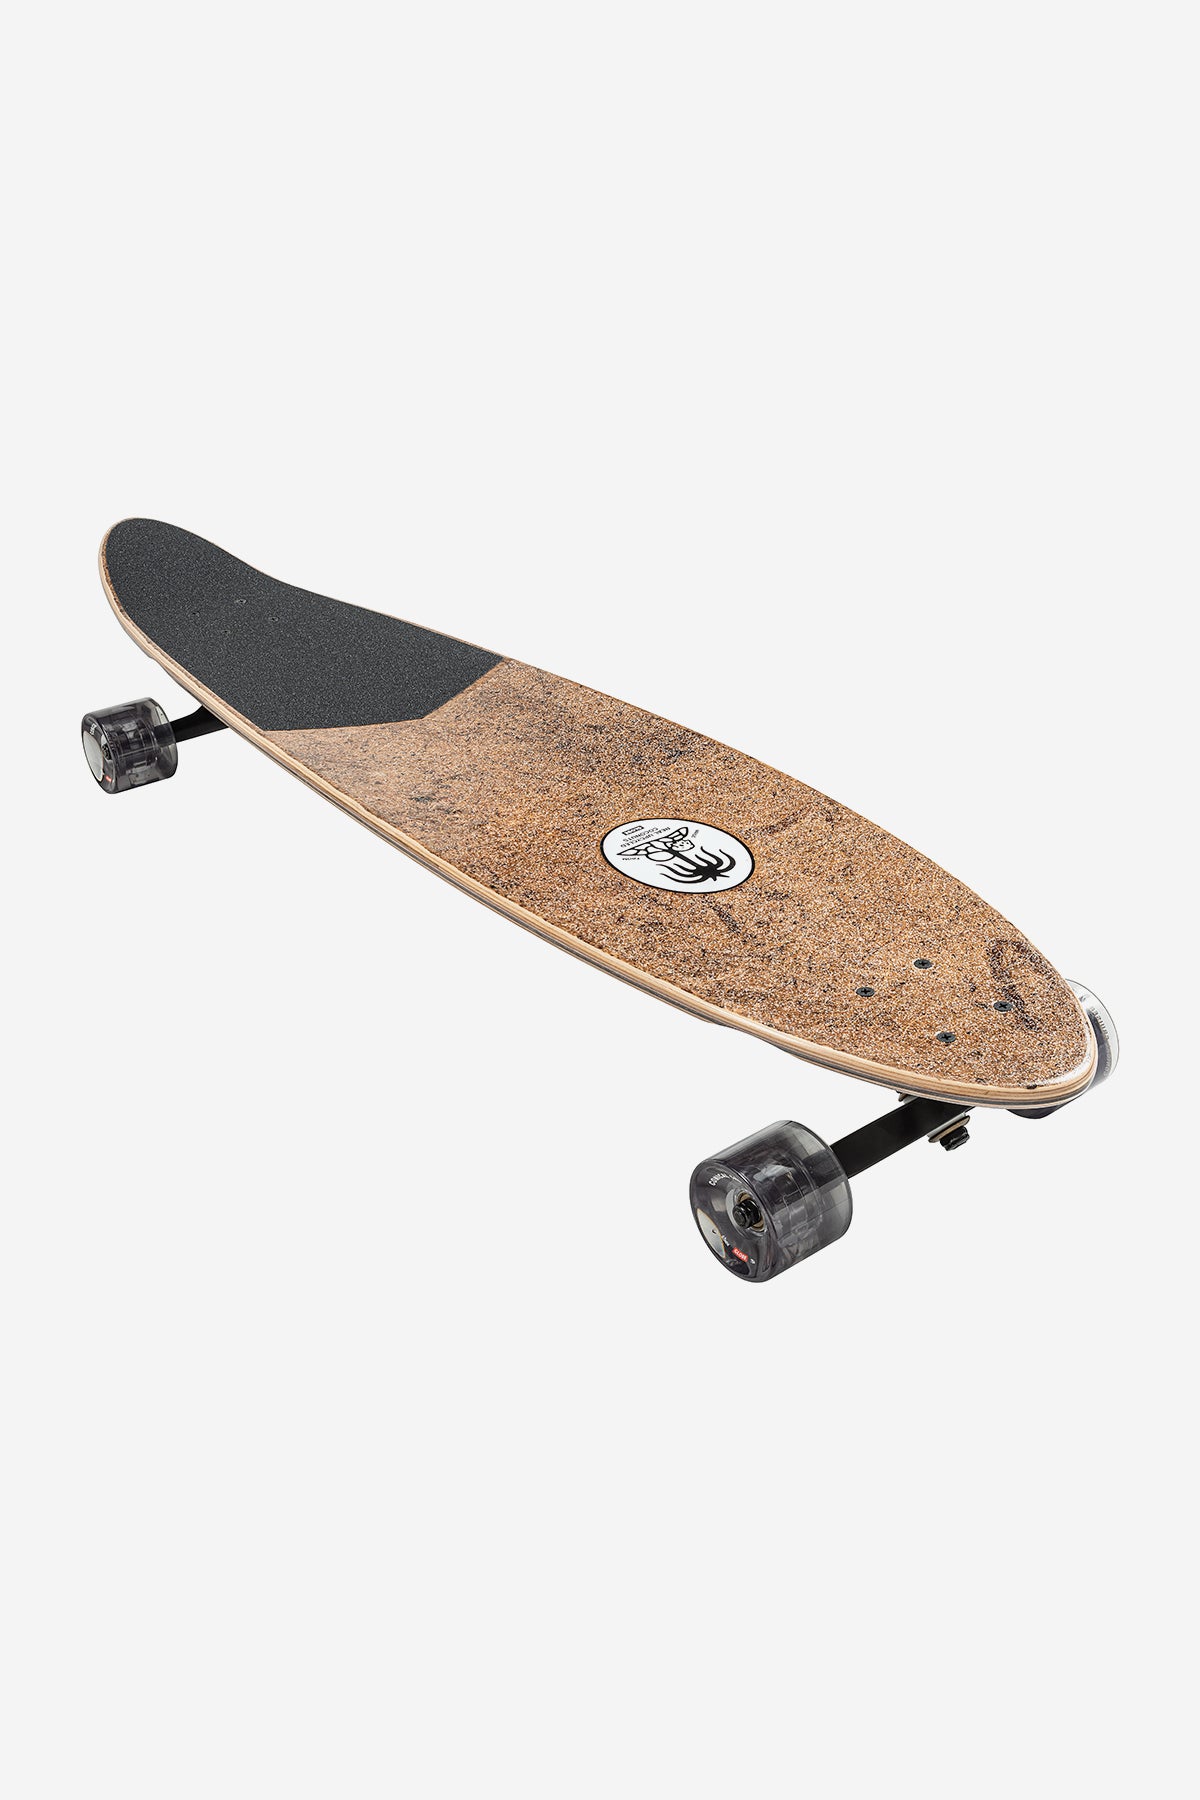 top angled view of the Pinner Classic 40" Longboard